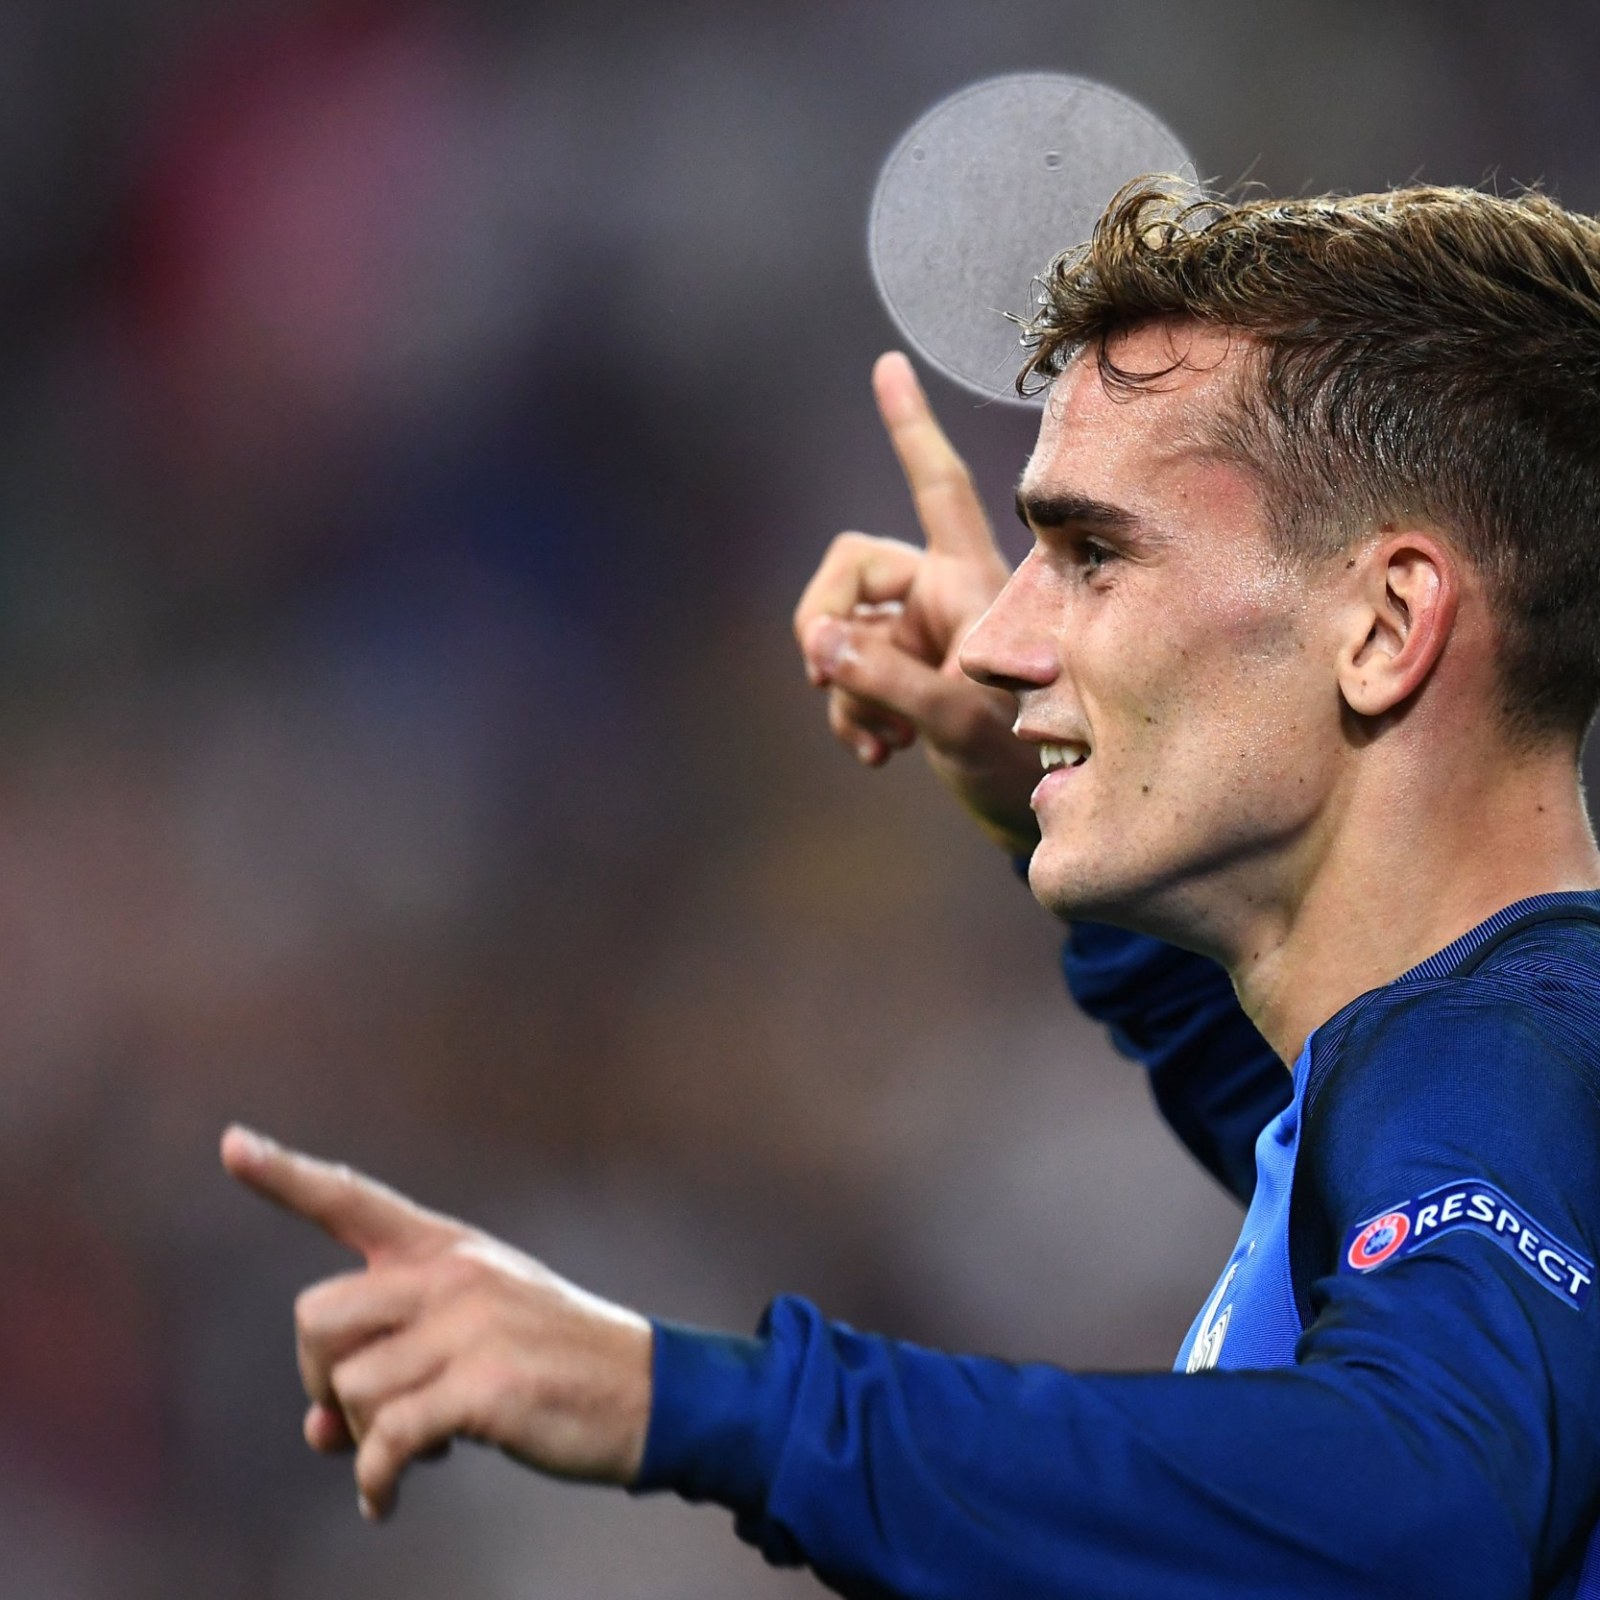 Antoine Griezmann Who Is The Star Of Uefa Euro 2016